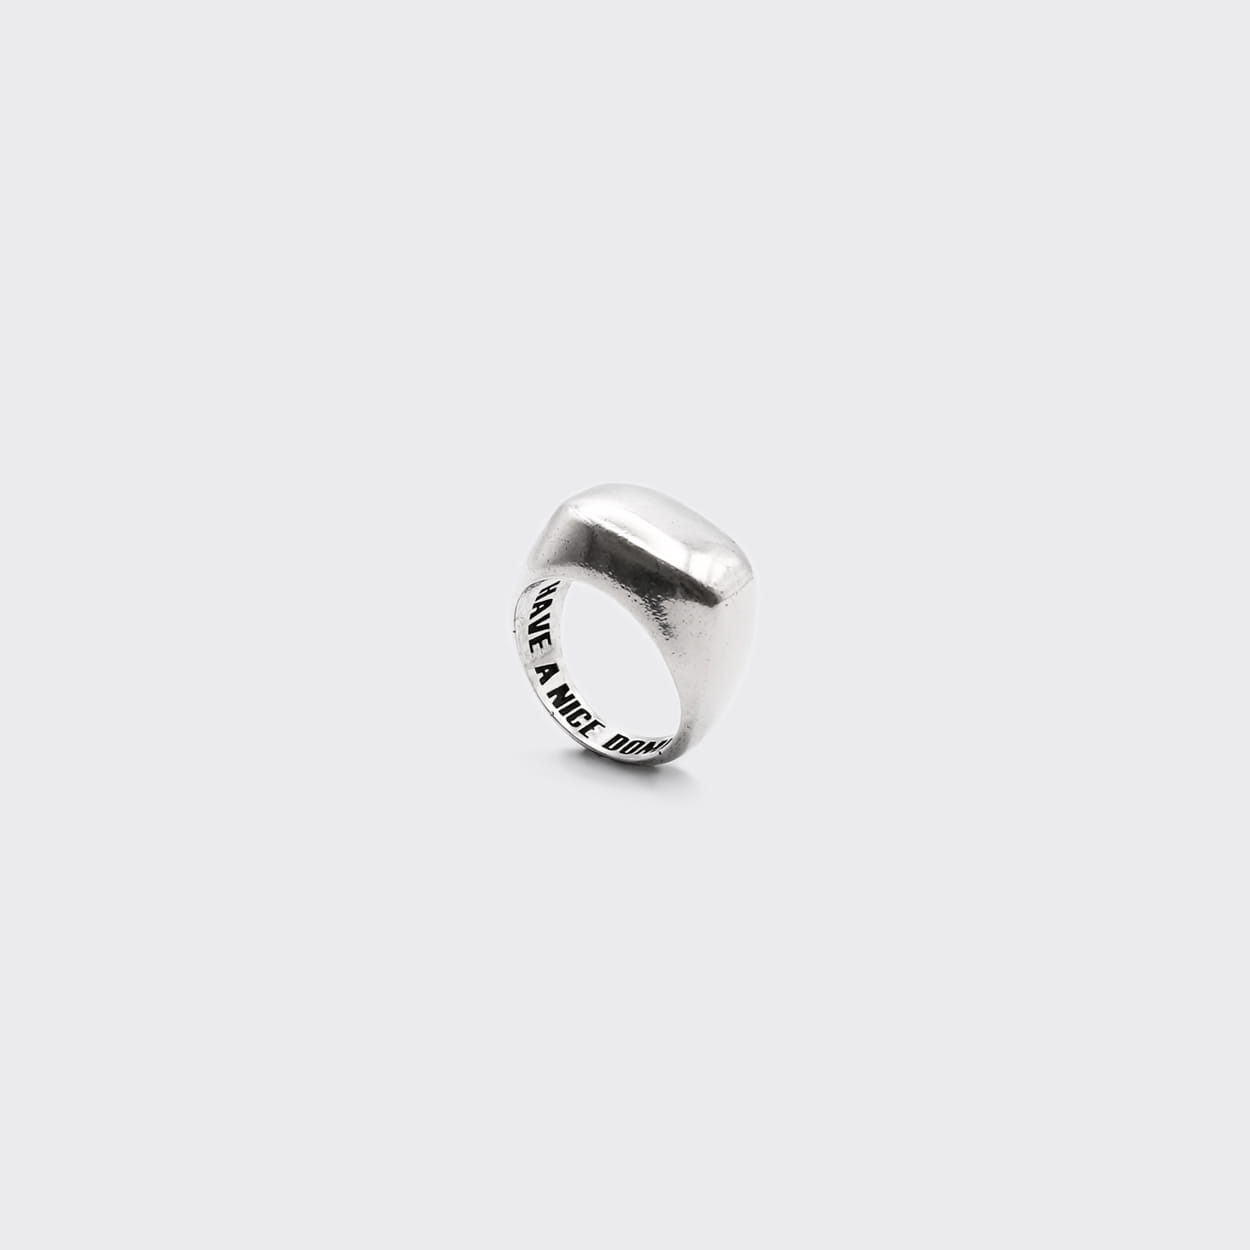 Atelier Domingo's Block silver ring is a tribute to New York block parties. This unisex ring is made in Spain. It is made of a high-quality 925 Sterling silver plating (10 microns). All our jewelry is unisex, made for both men and women.